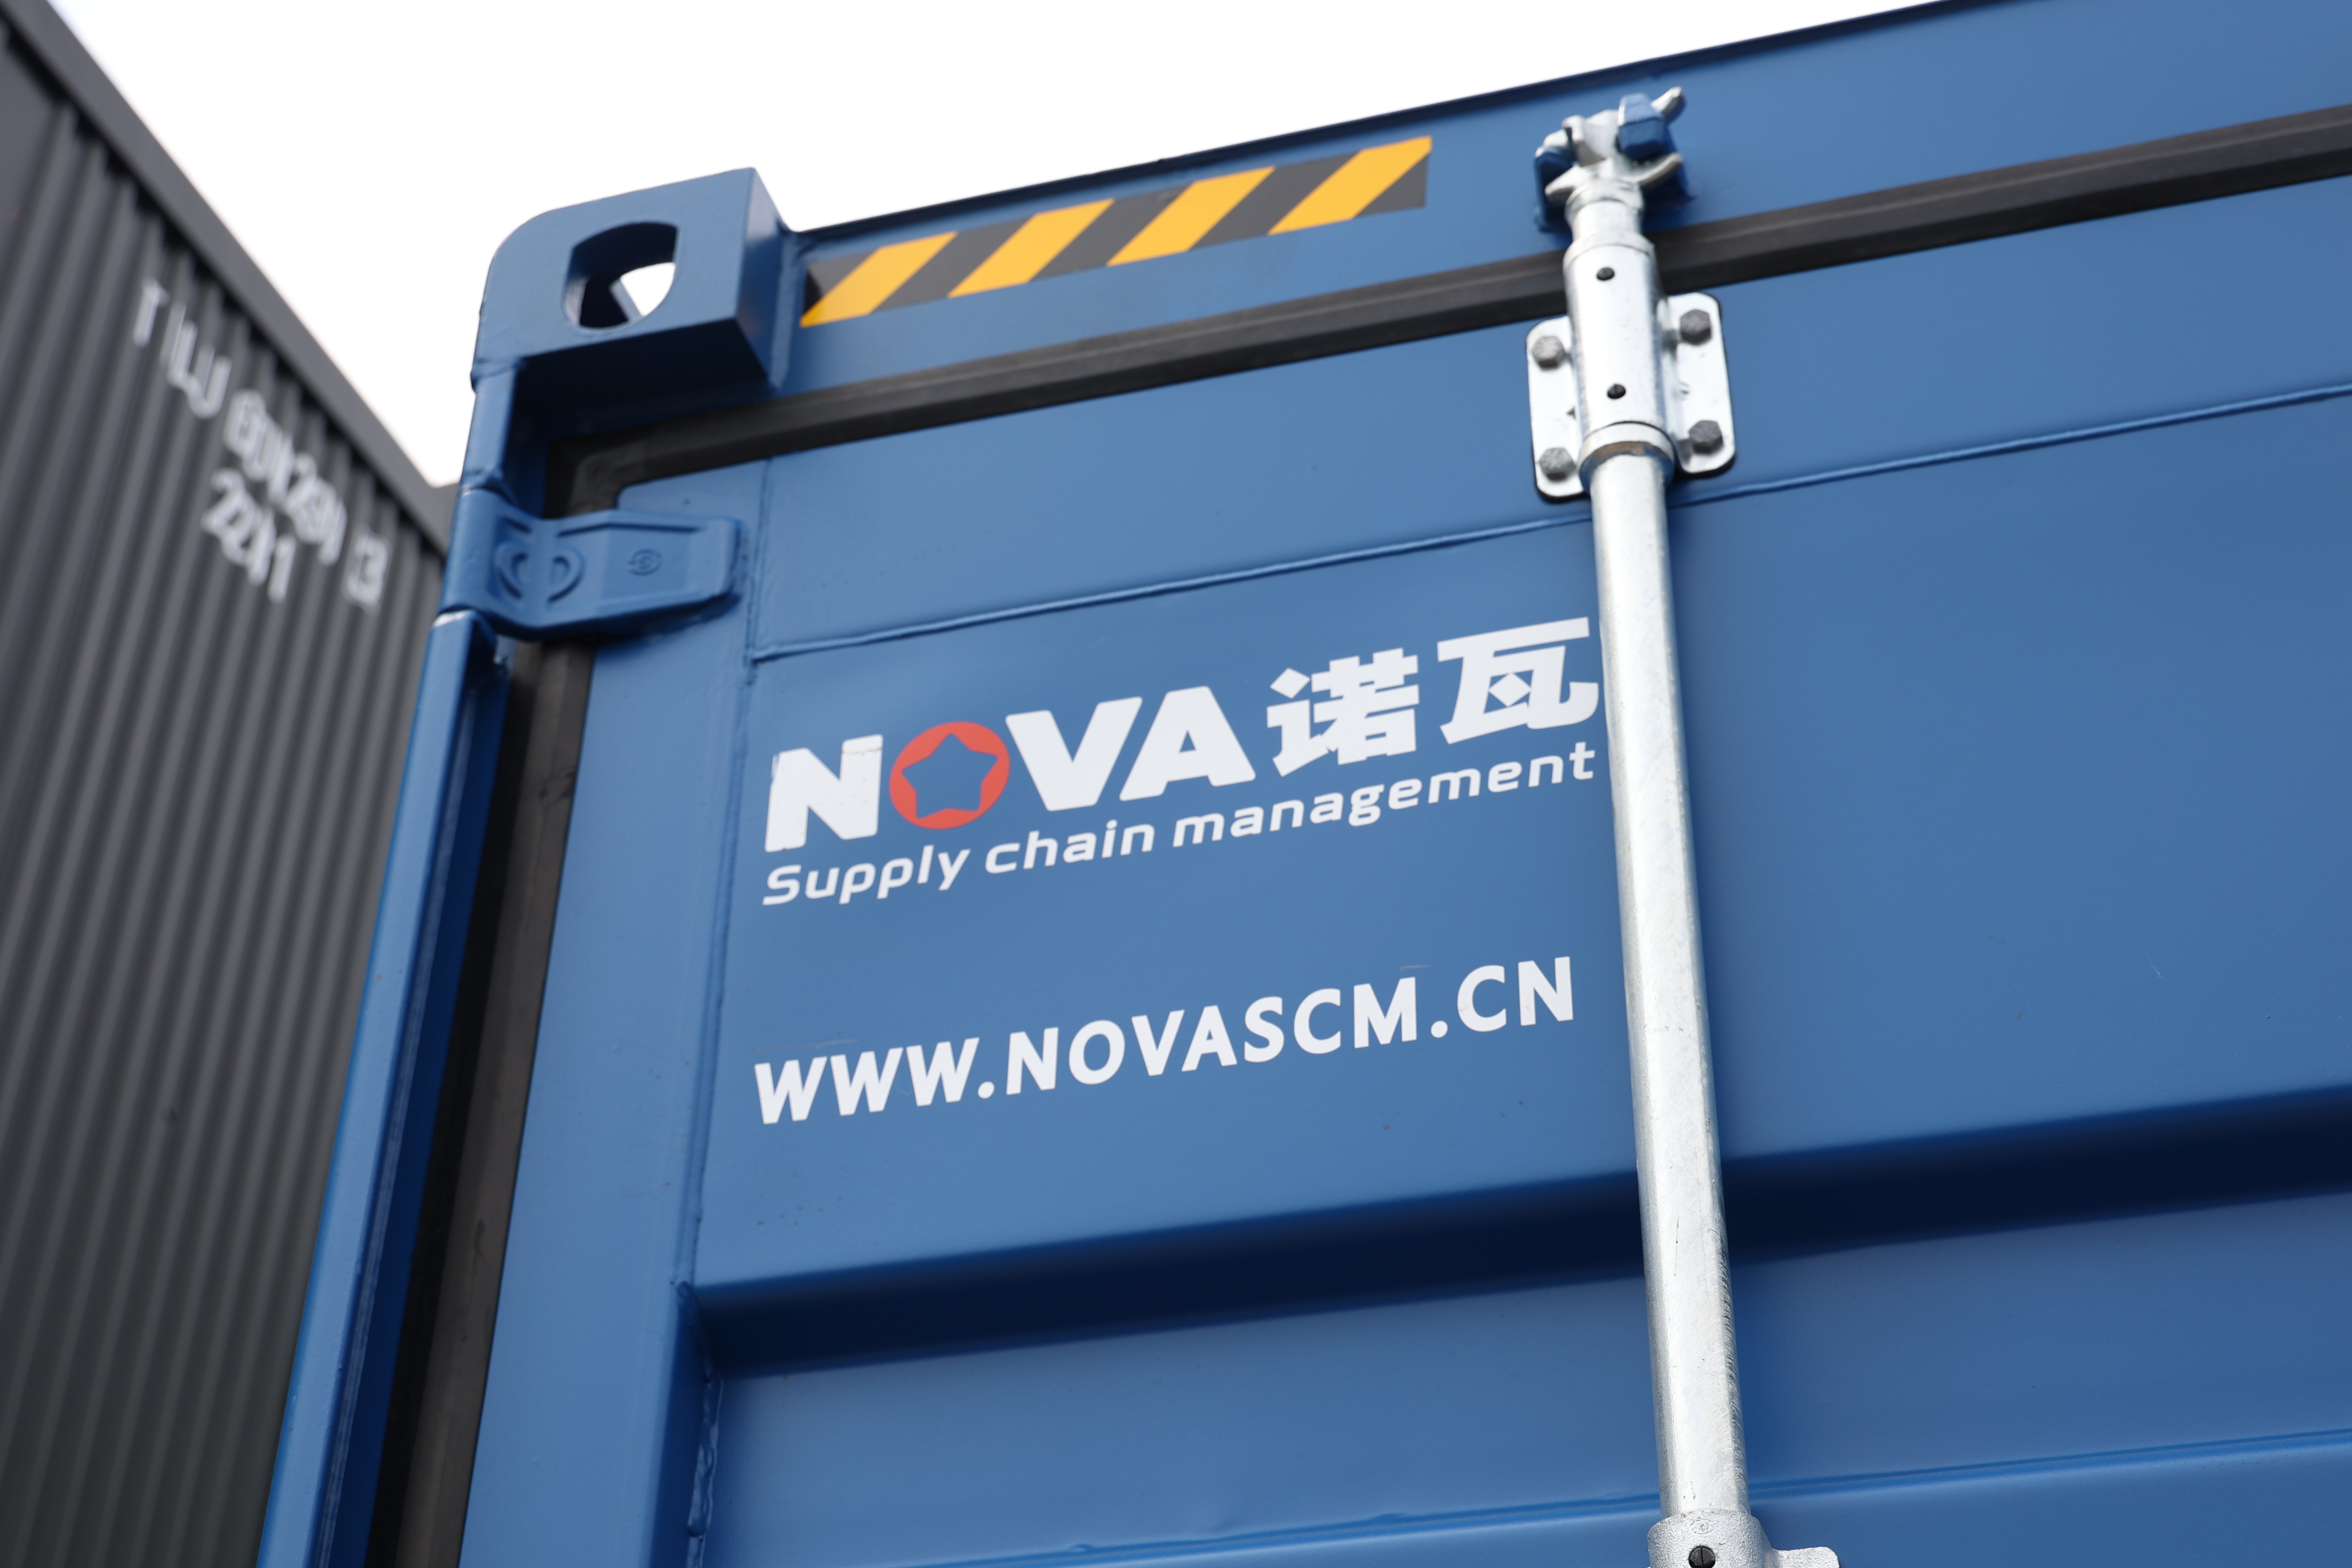 Why choose a container rental service?